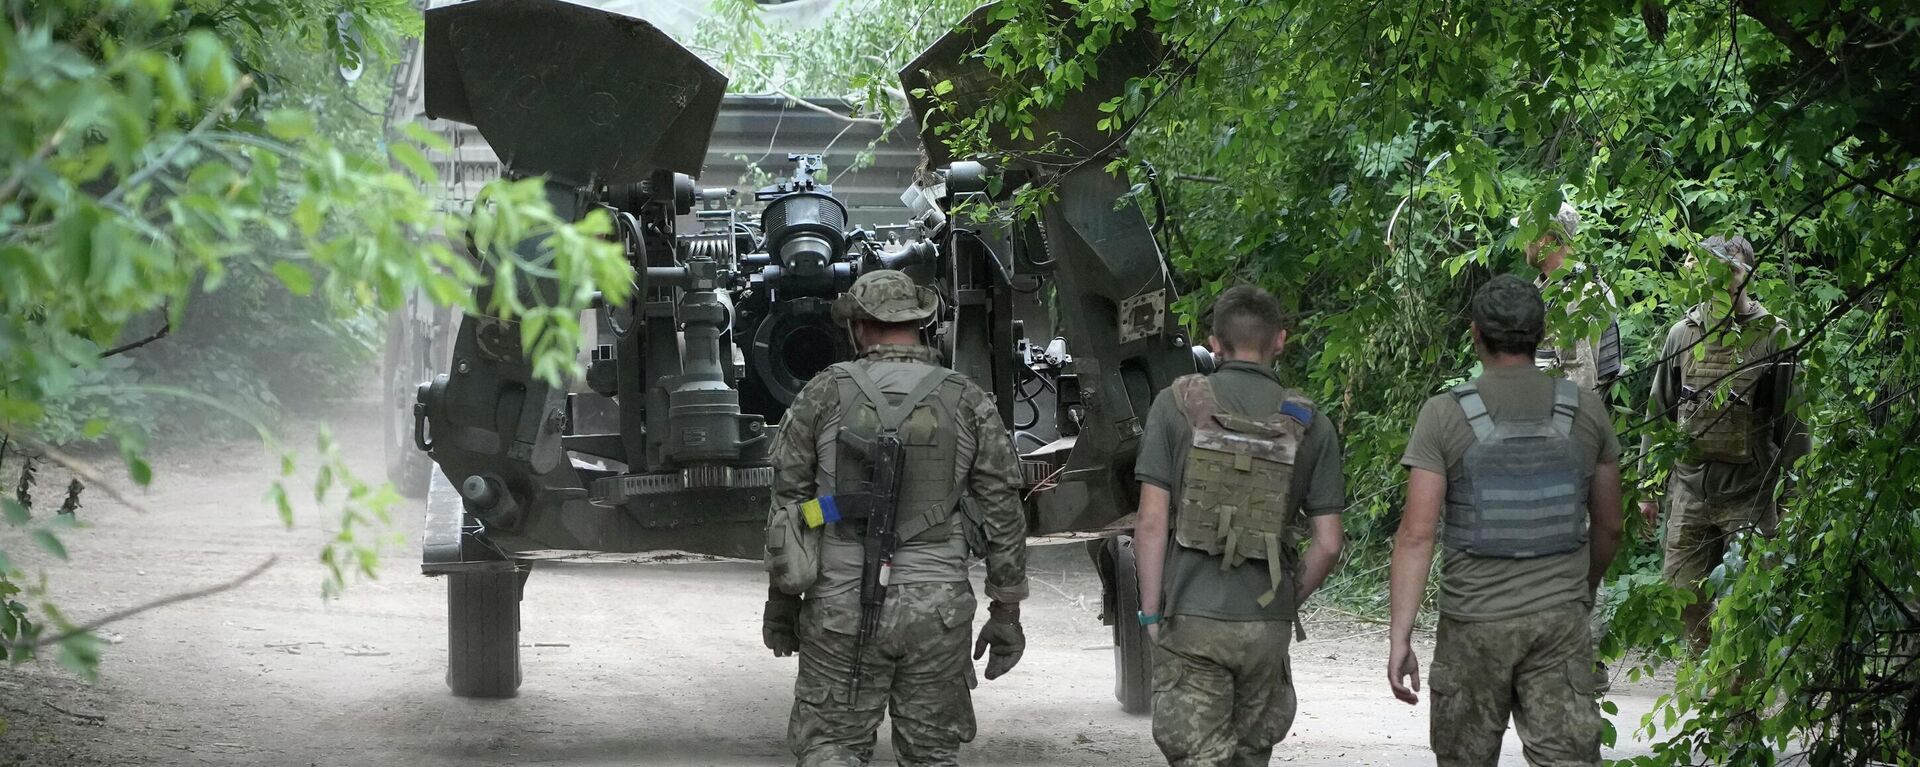 Ukrainian soldiers move a U.S.-supplied M777 howitzer into position to fire at Russian positions in Ukraine's eastern Donbas region Saturday, June 18, 2022 - Sputnik International, 1920, 14.07.2022